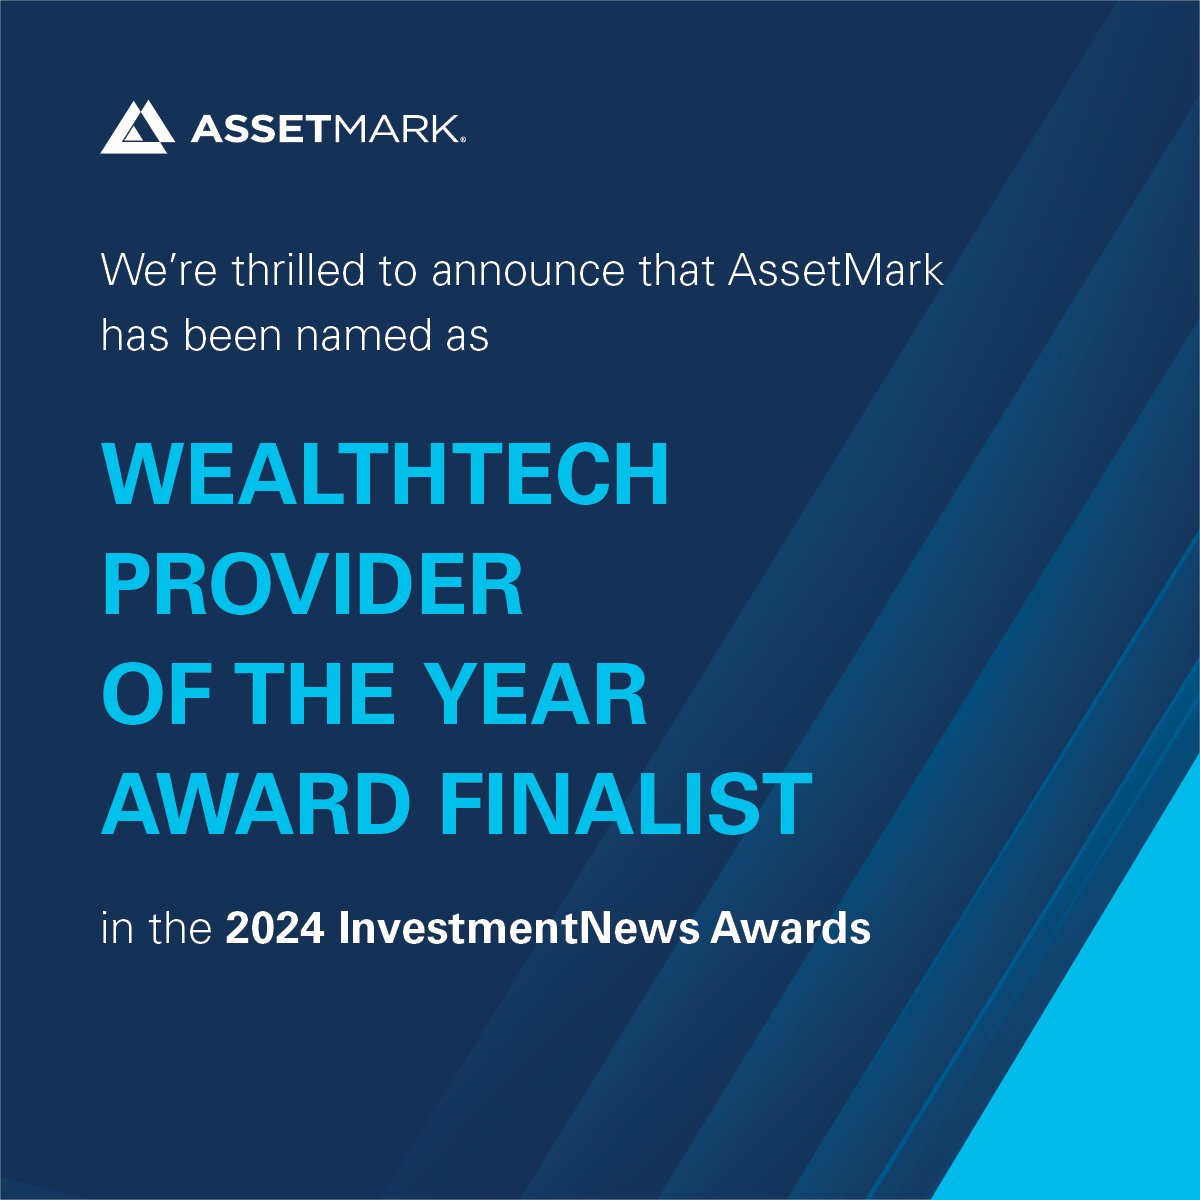 We're thrilled to announce that AssetMark has been named a finalist for the Wealthtech Provider of the Year award in the 2024 @investmentnews #ExcellenceAwards! This recognition is a tremendous honor, and it reflects our dedication to providing innovative wealthtech solutions